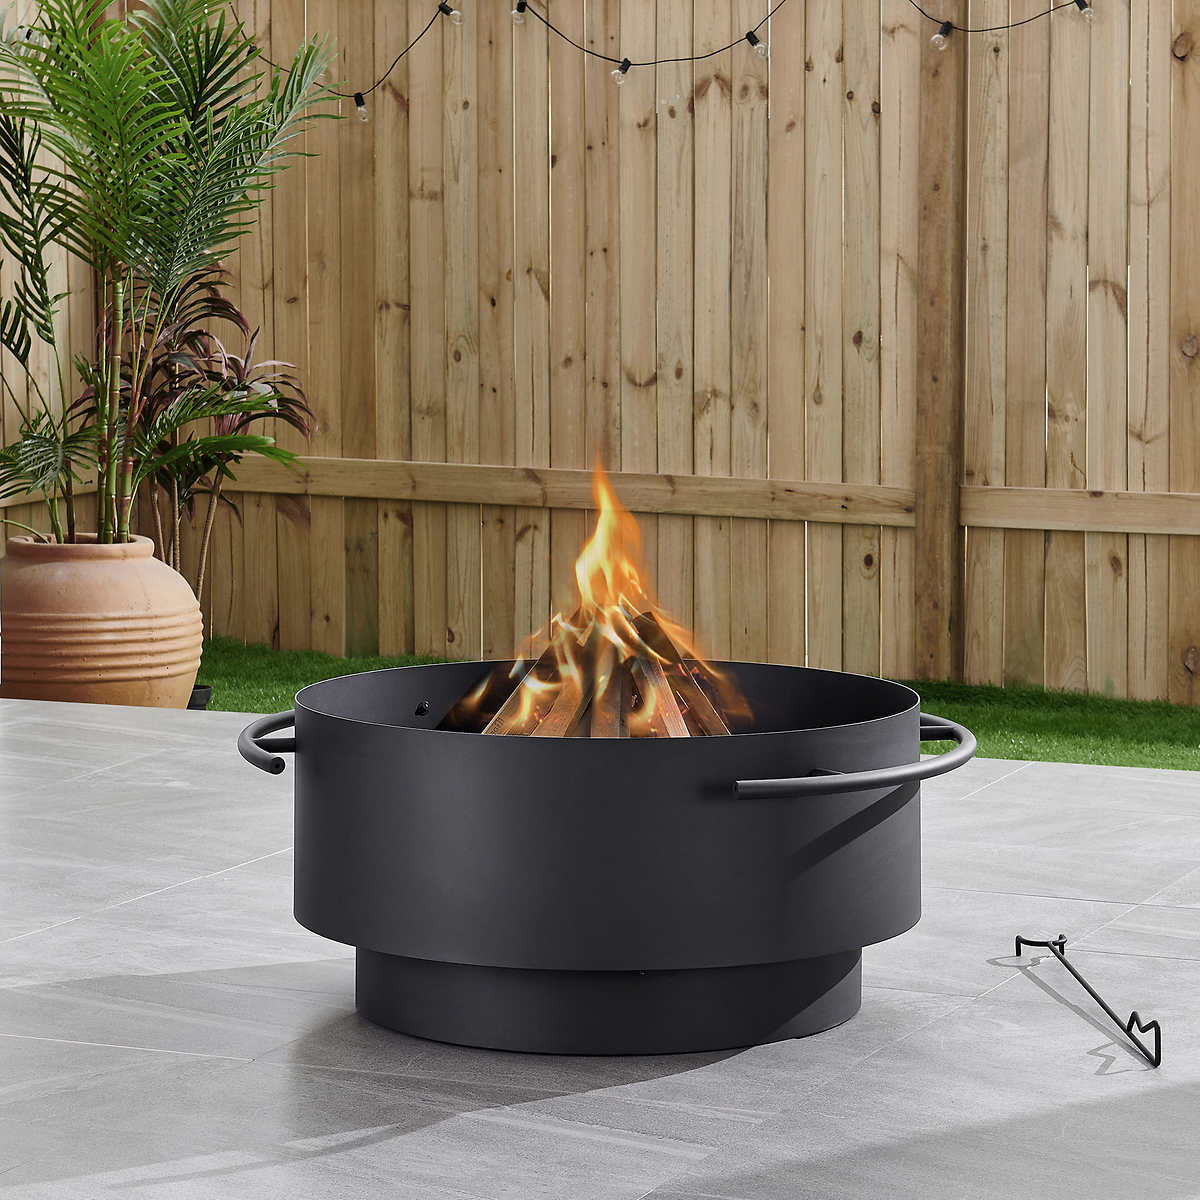 Ove Decors Brooks 28 In Round Outdoor, Red Ember Sechee Large Round Iron Wood Burning Fire Pit